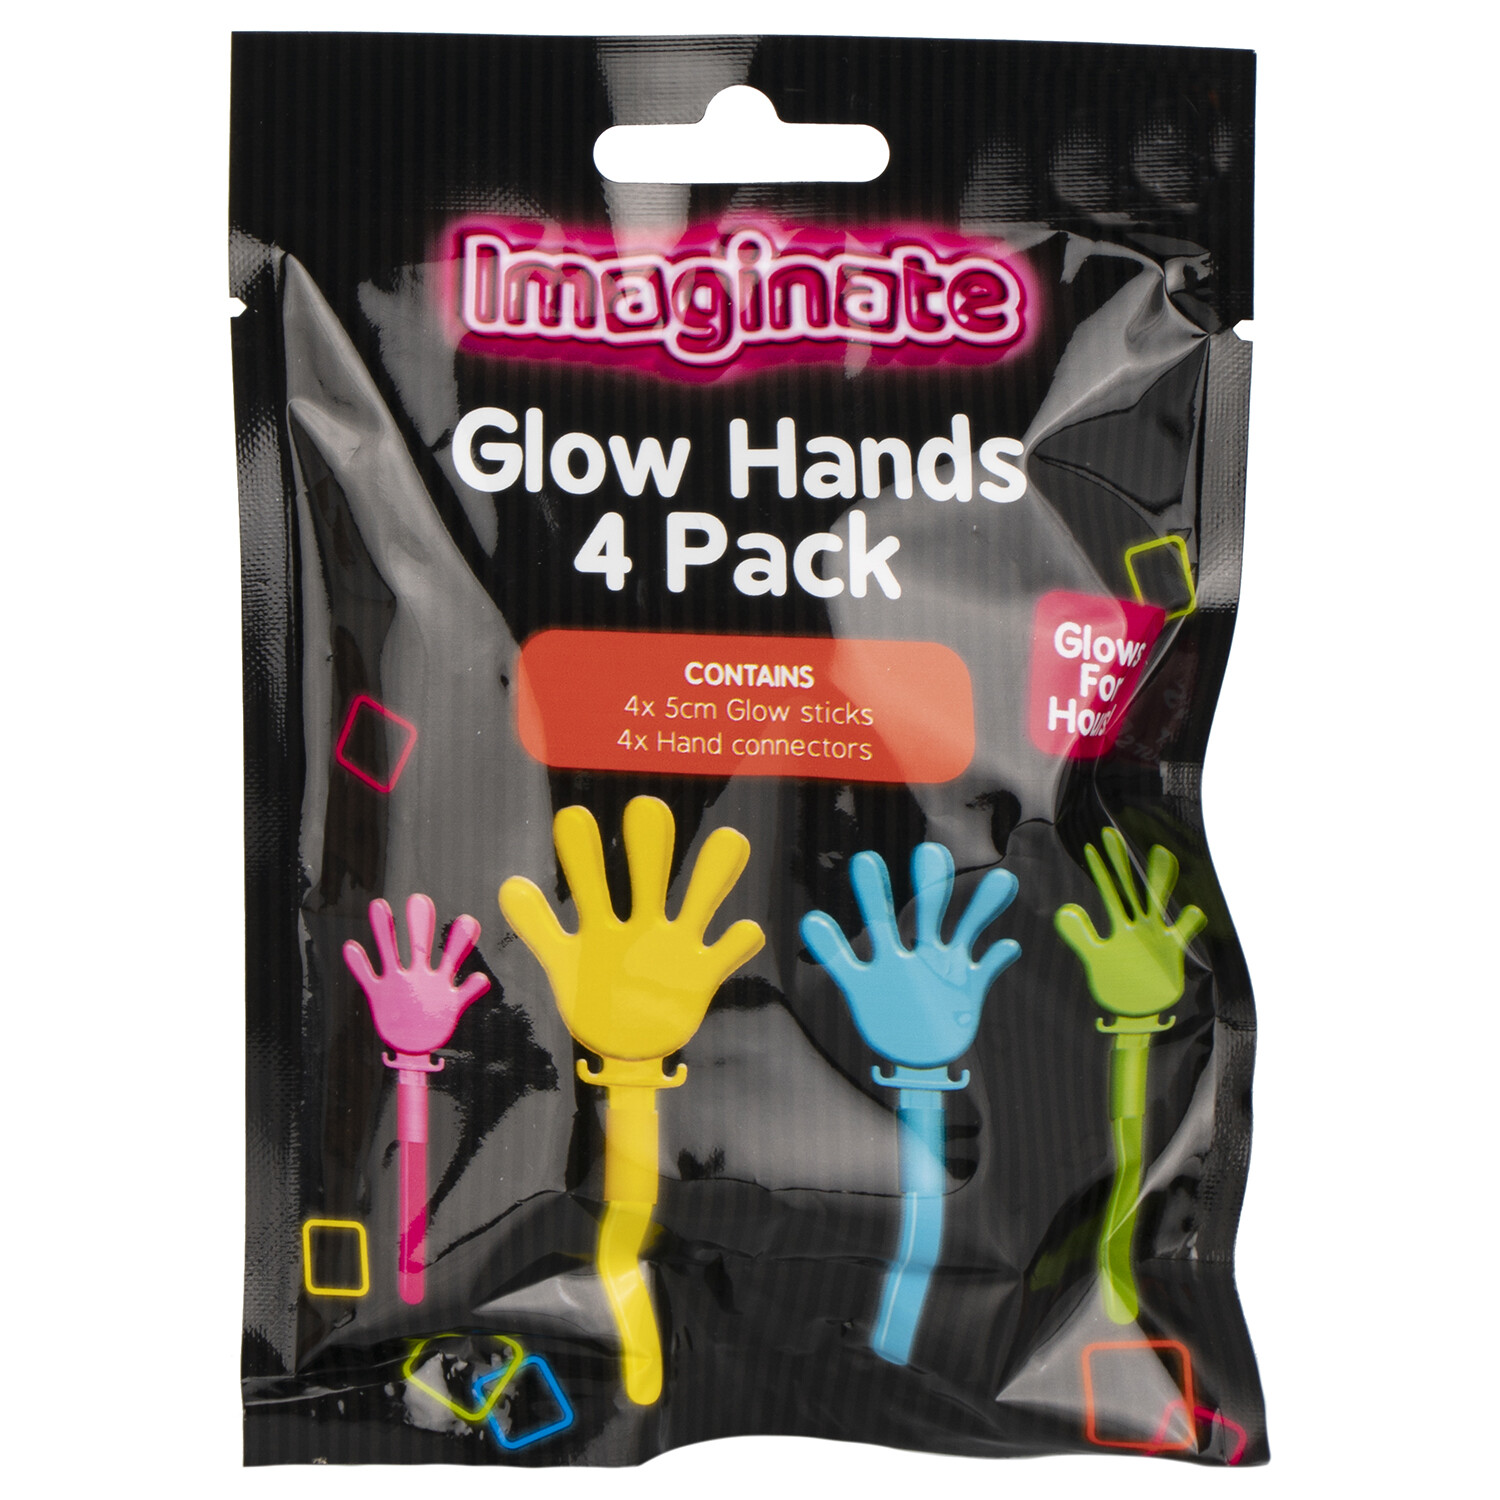 Imaginate Glow Party Favours 4 Pack Image